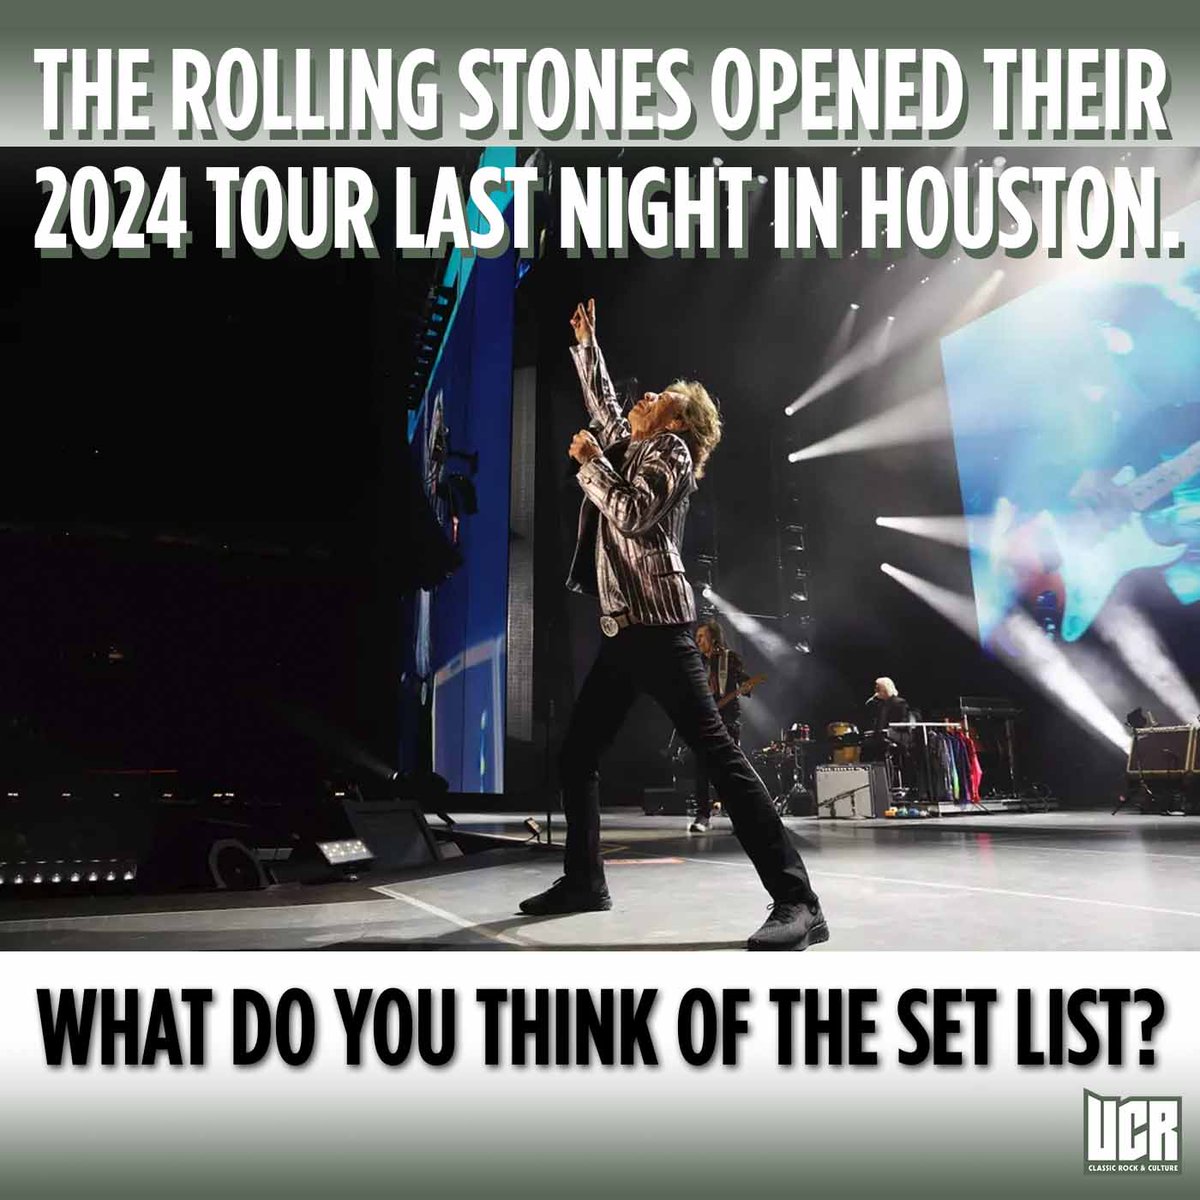 The @RollingStones are back in action. Read about opening night in Houston here: ultimateclassicrock.com/rolling-stones…